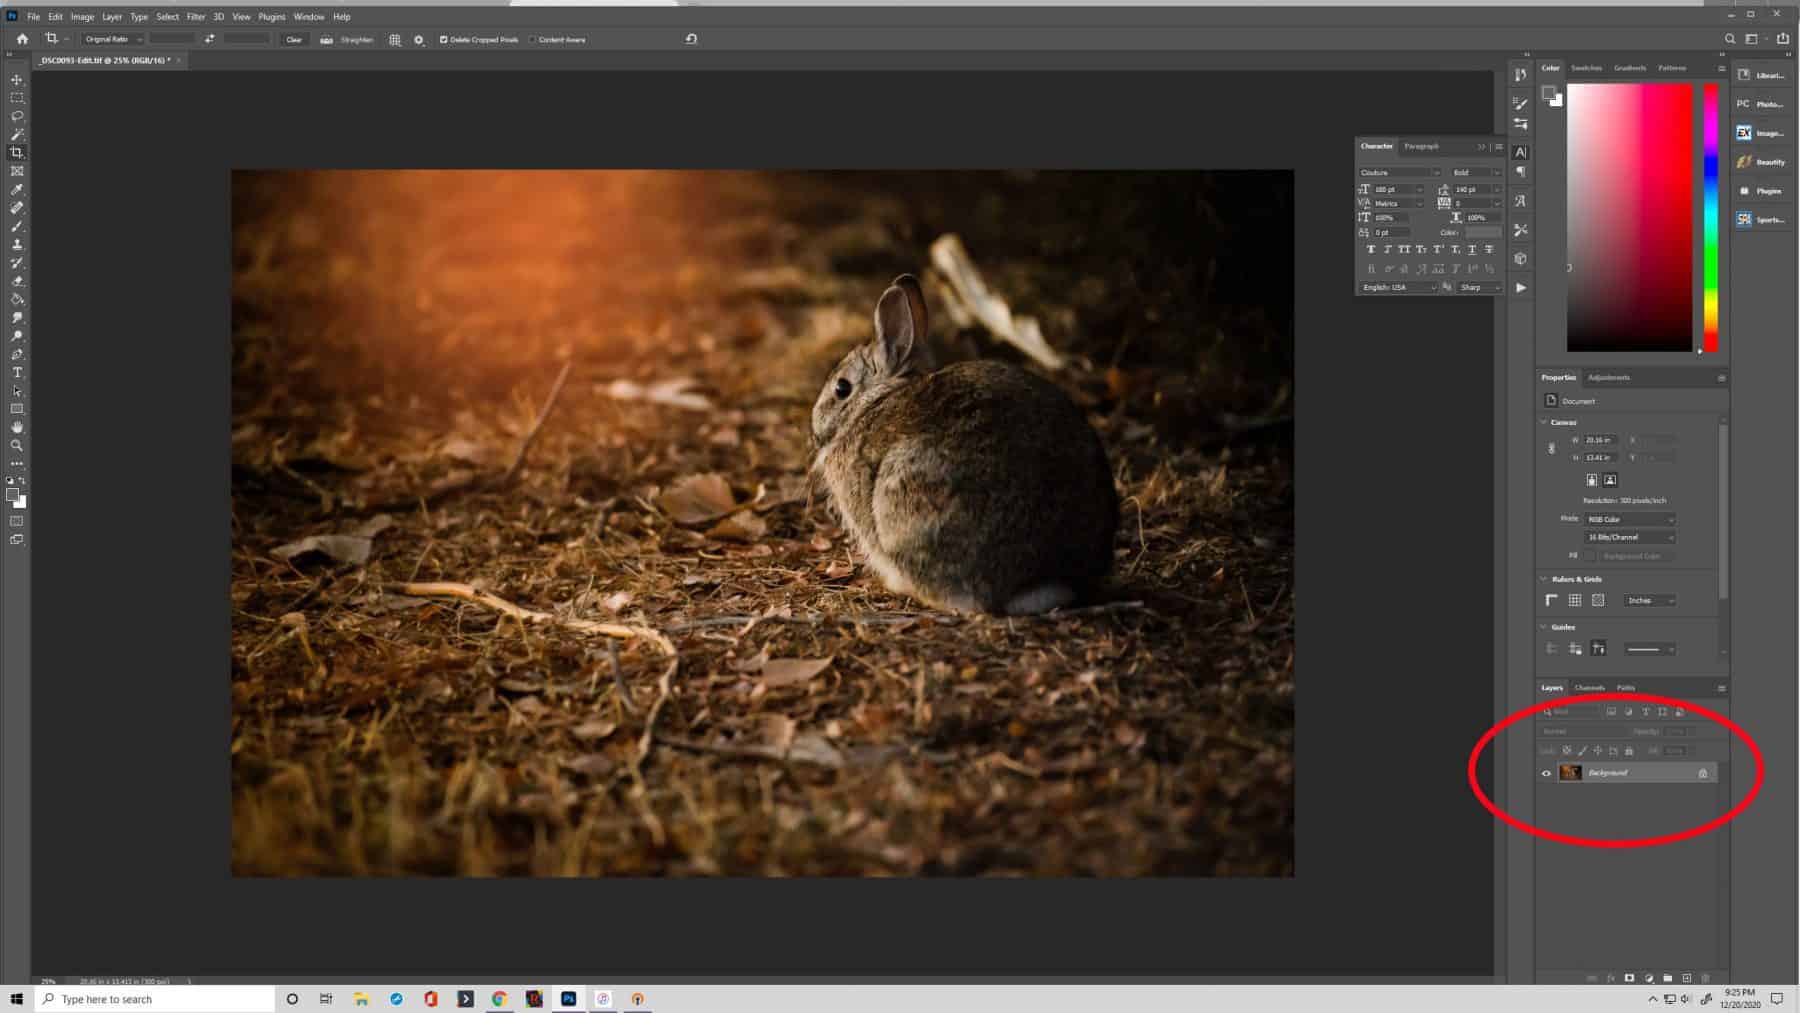 Unlock the Background Layer in Photoshop